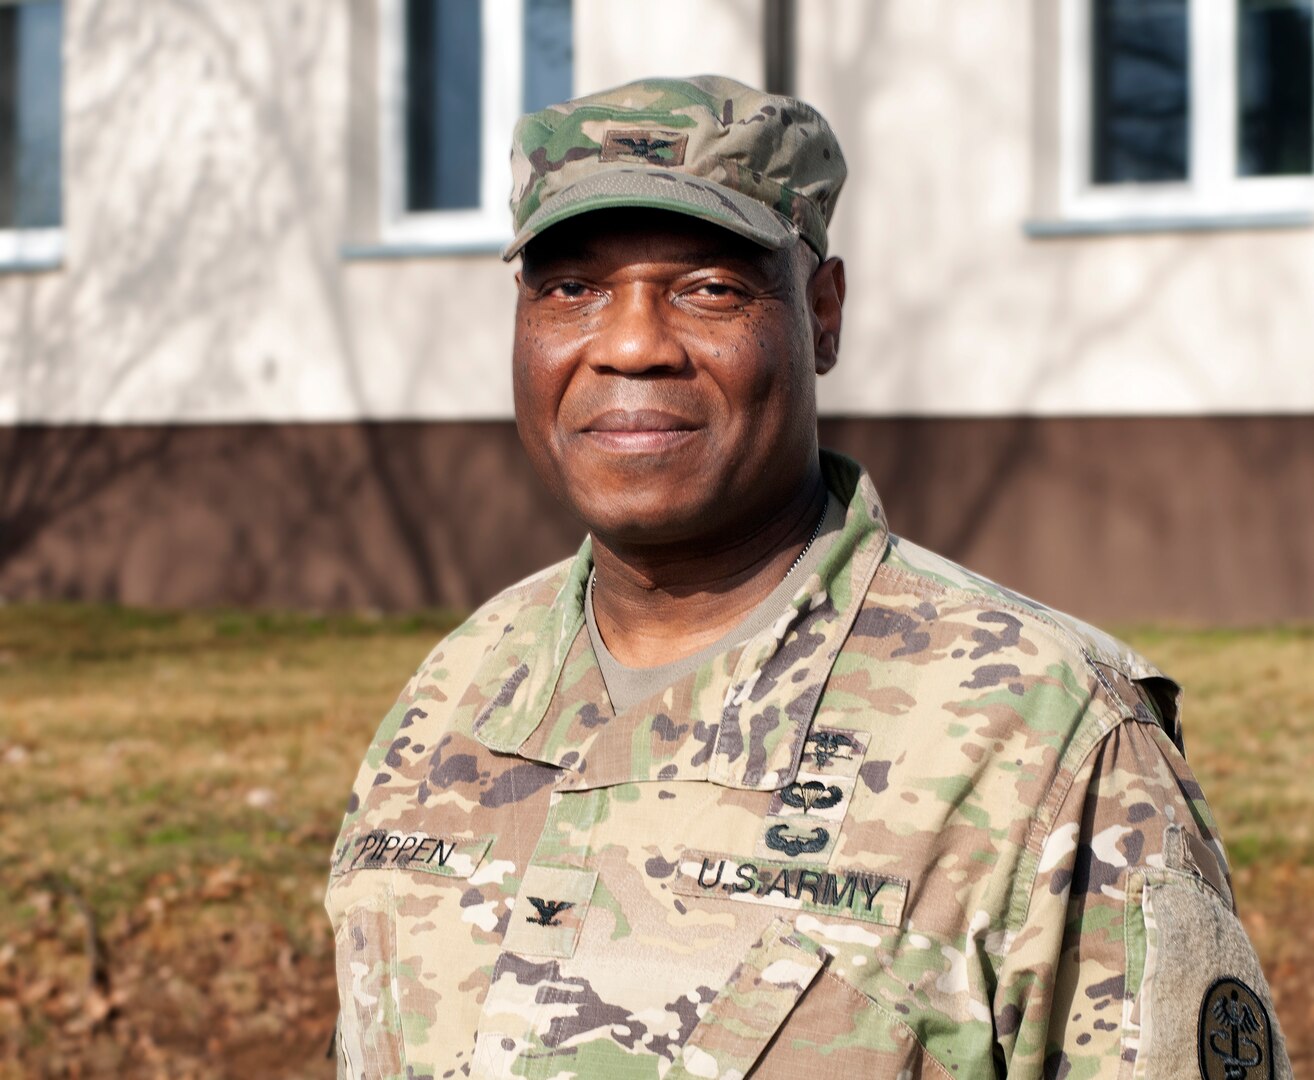 Col. Andre Pippen, the chief of staff for Regional Health Command Europe, poses for a photo. Pippen is preparing to retire from the U.S. Army after 30 years of service.